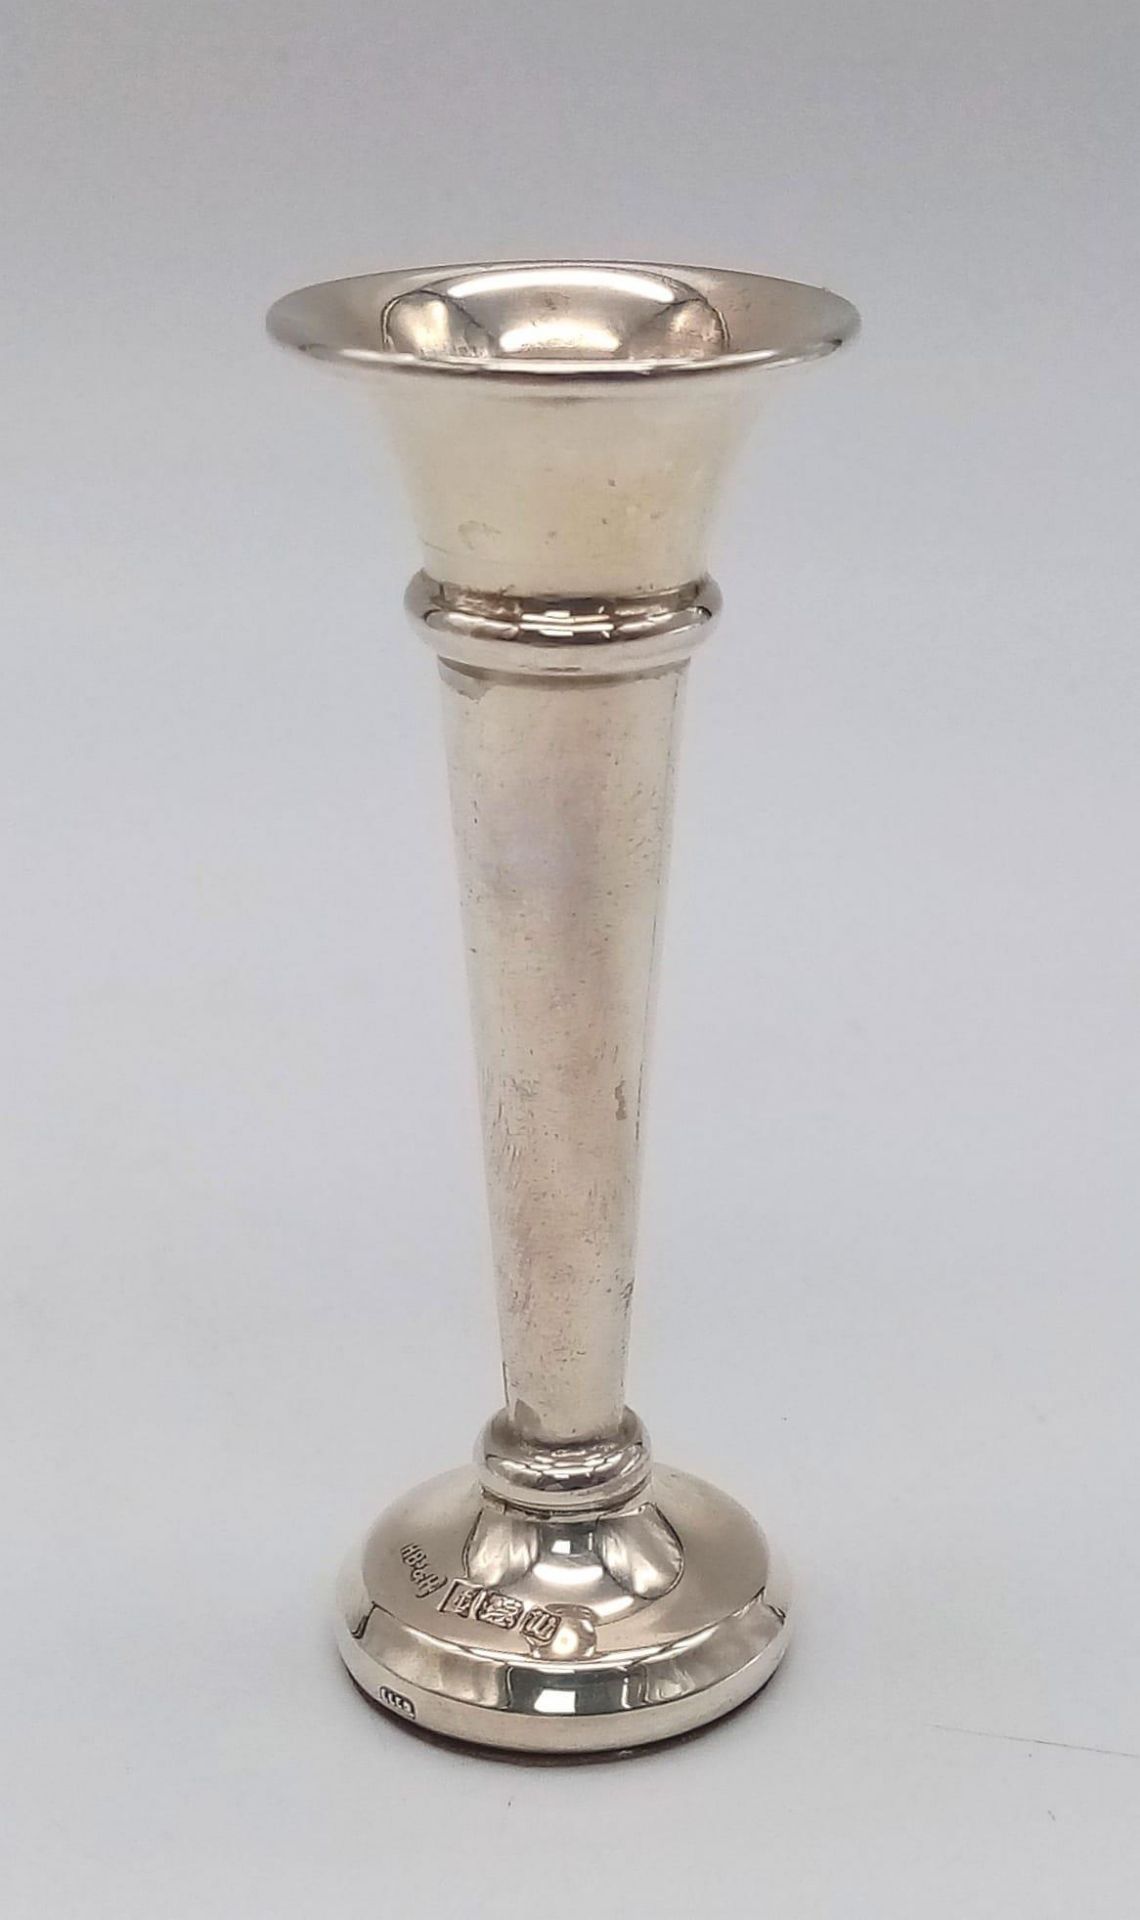 A vintage sterling silver bud vase. Come with full Birmingham hallmarks. Total weight 14.6G.